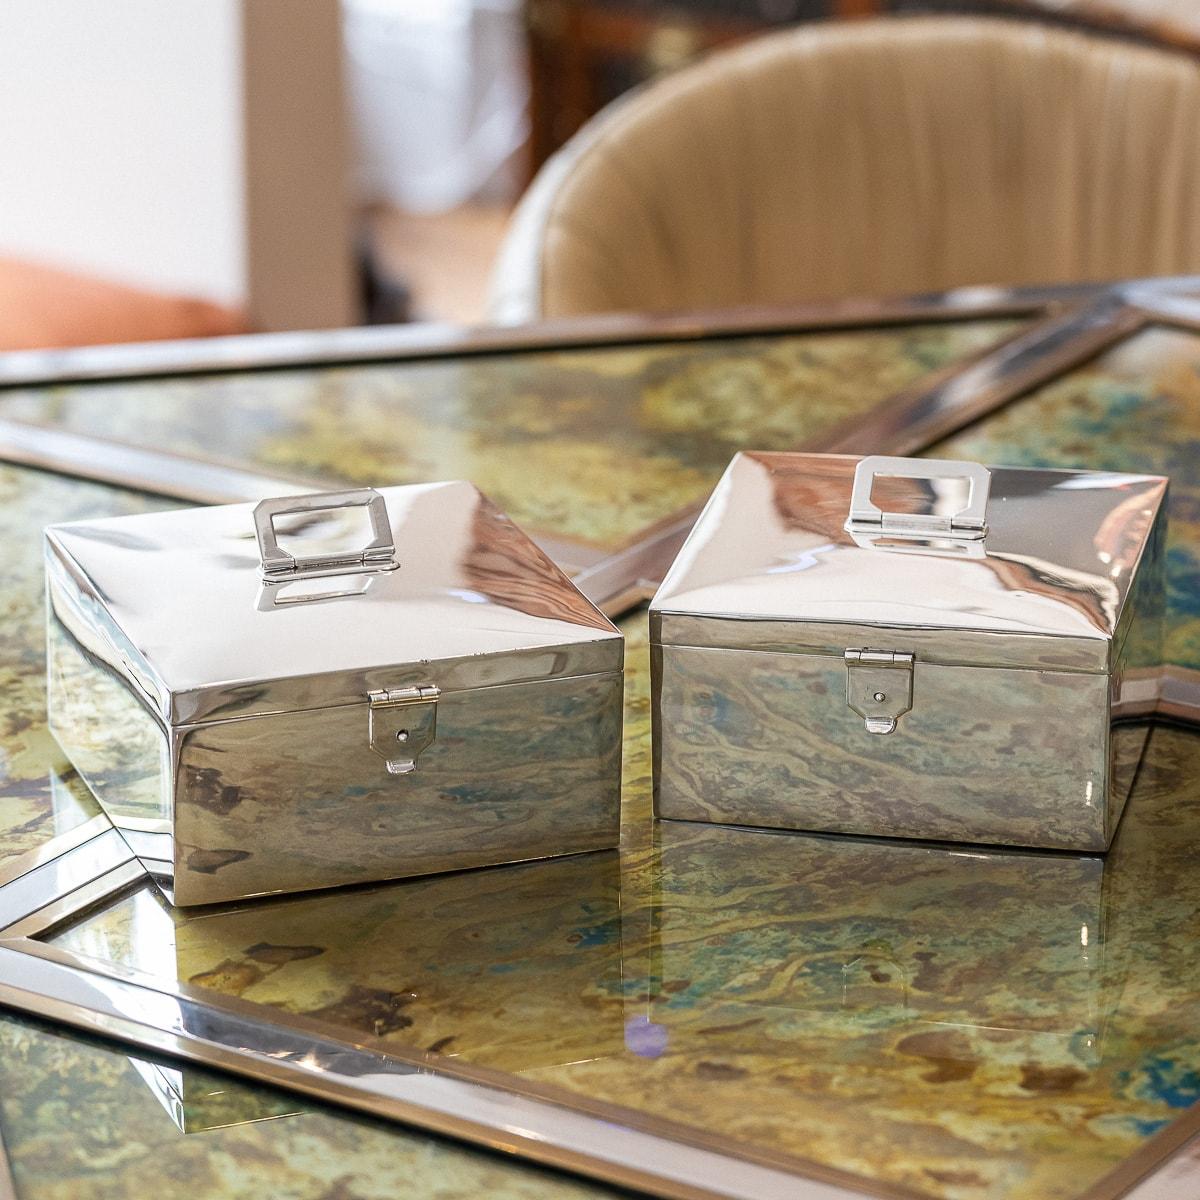 Antique 20th Century British made solid silver pair of portable cigar boxes, made by one of the leading silversmiths of the day, Asprey & Co. The pair of boxes scream Art Deco, elegant and simplistic, very heavy gauge, with clean lines, rectangular